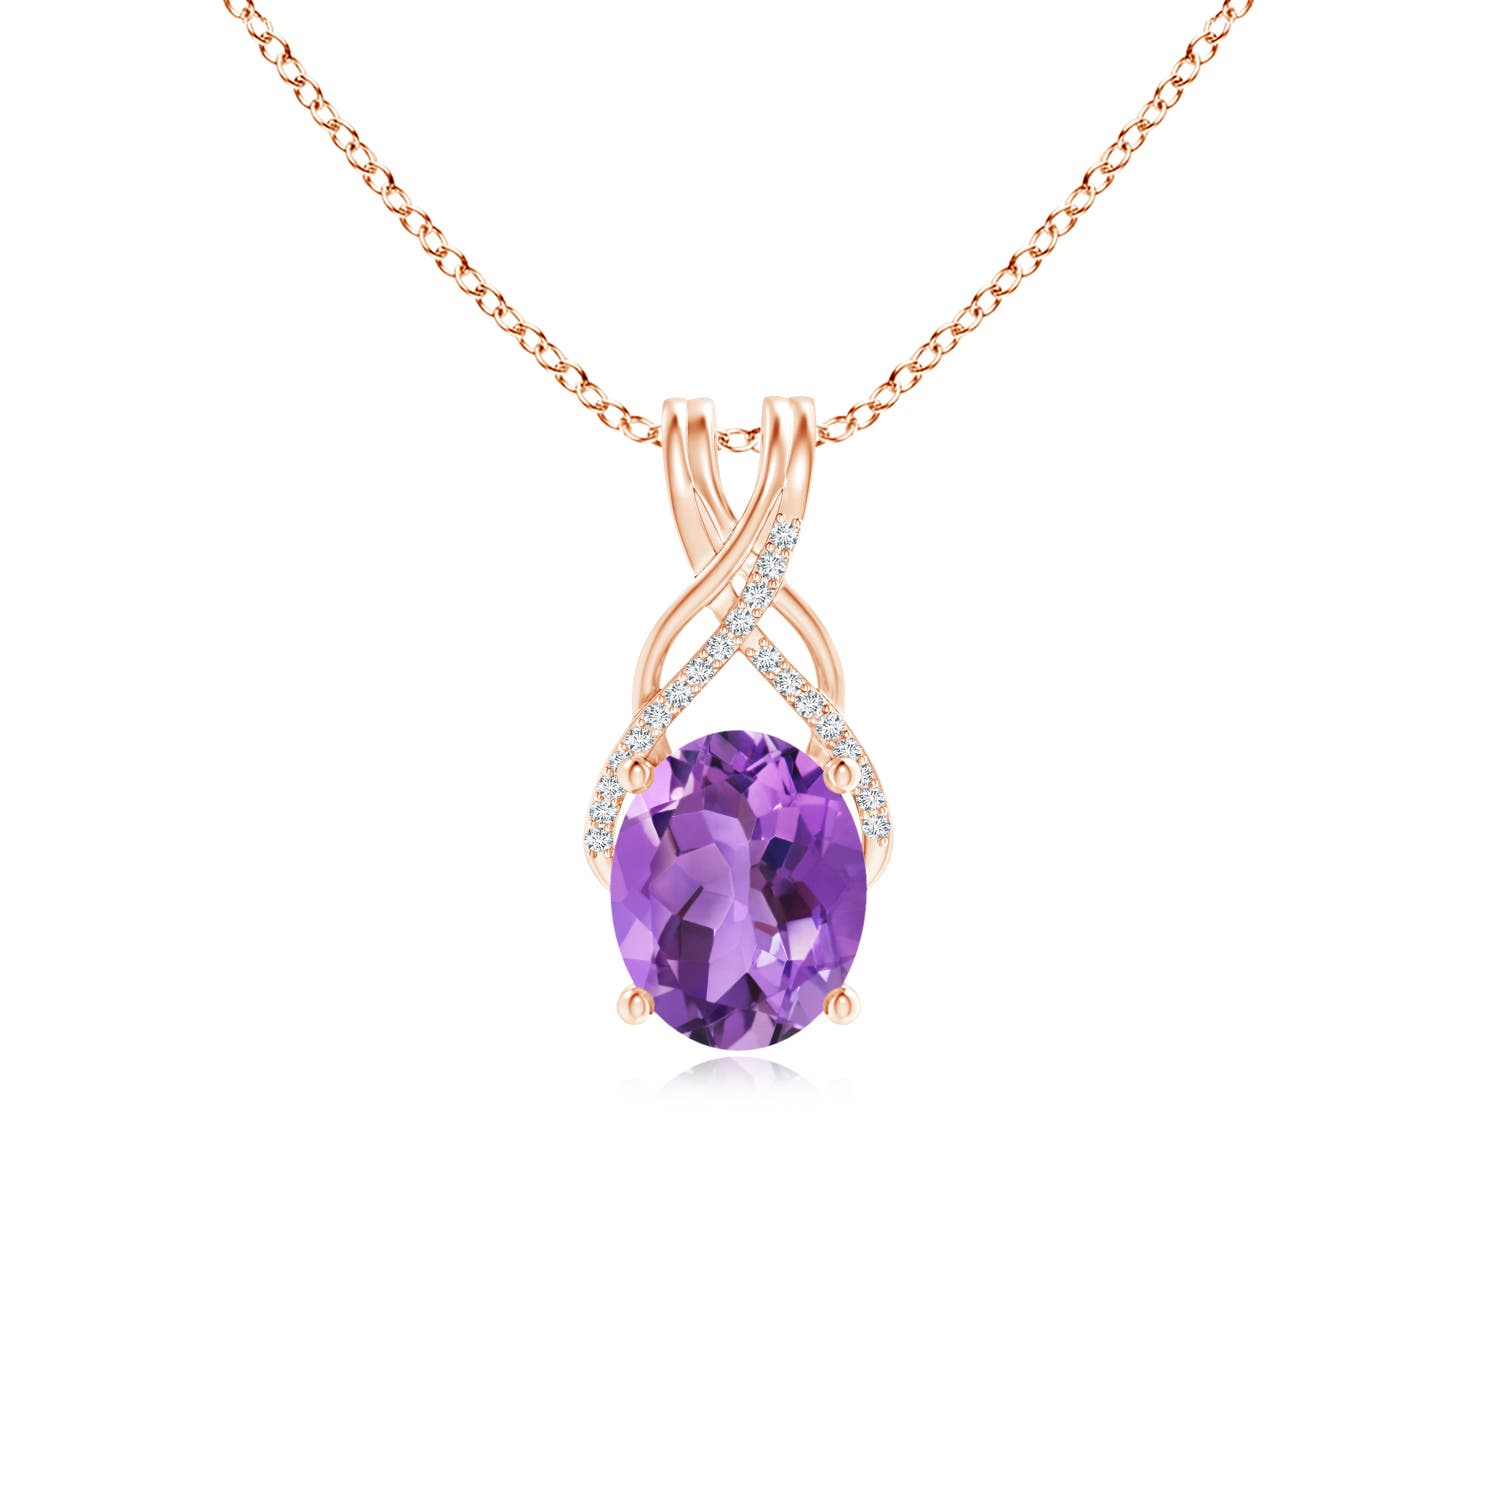 AA - Amethyst / 2.35 CT / 14 KT Rose Gold